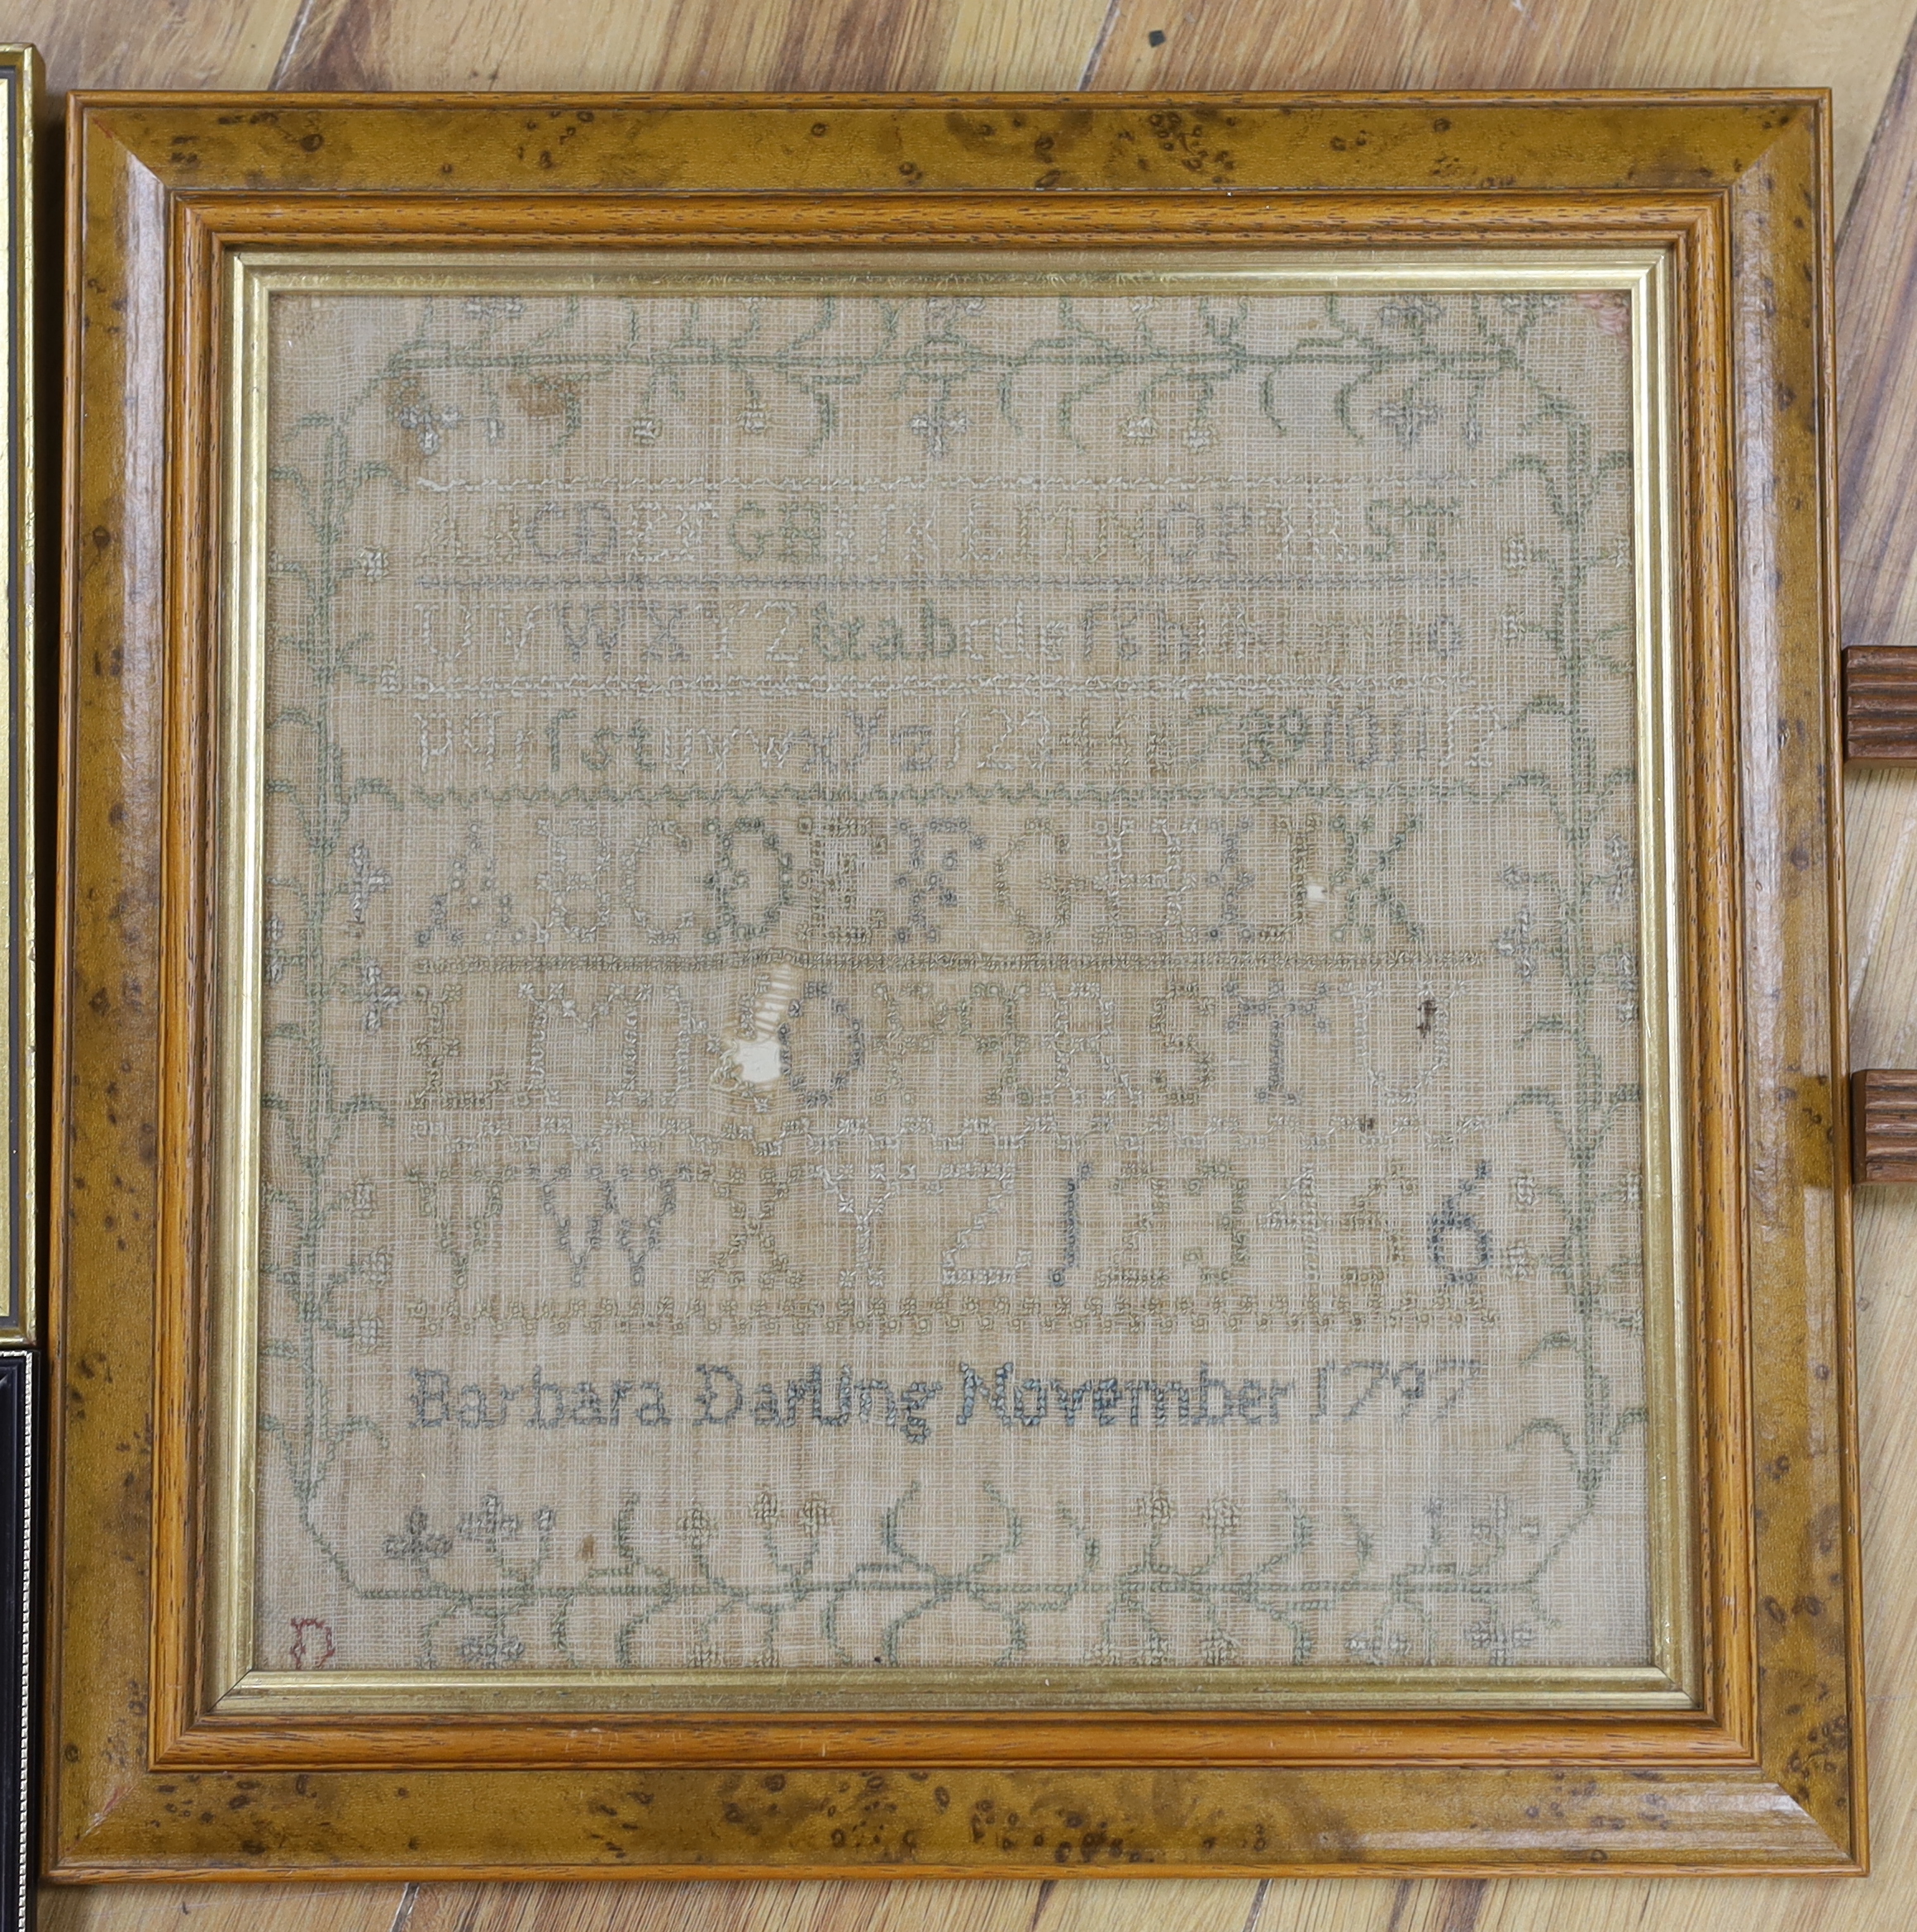 A George III dated 1797 framed alphabet sampler, by Barbara Darling and two similar dated samplers 1825 and 1828 by Elizabeth Kidd, together with a later undated 19th century sampler by Jane Kennedy (4)